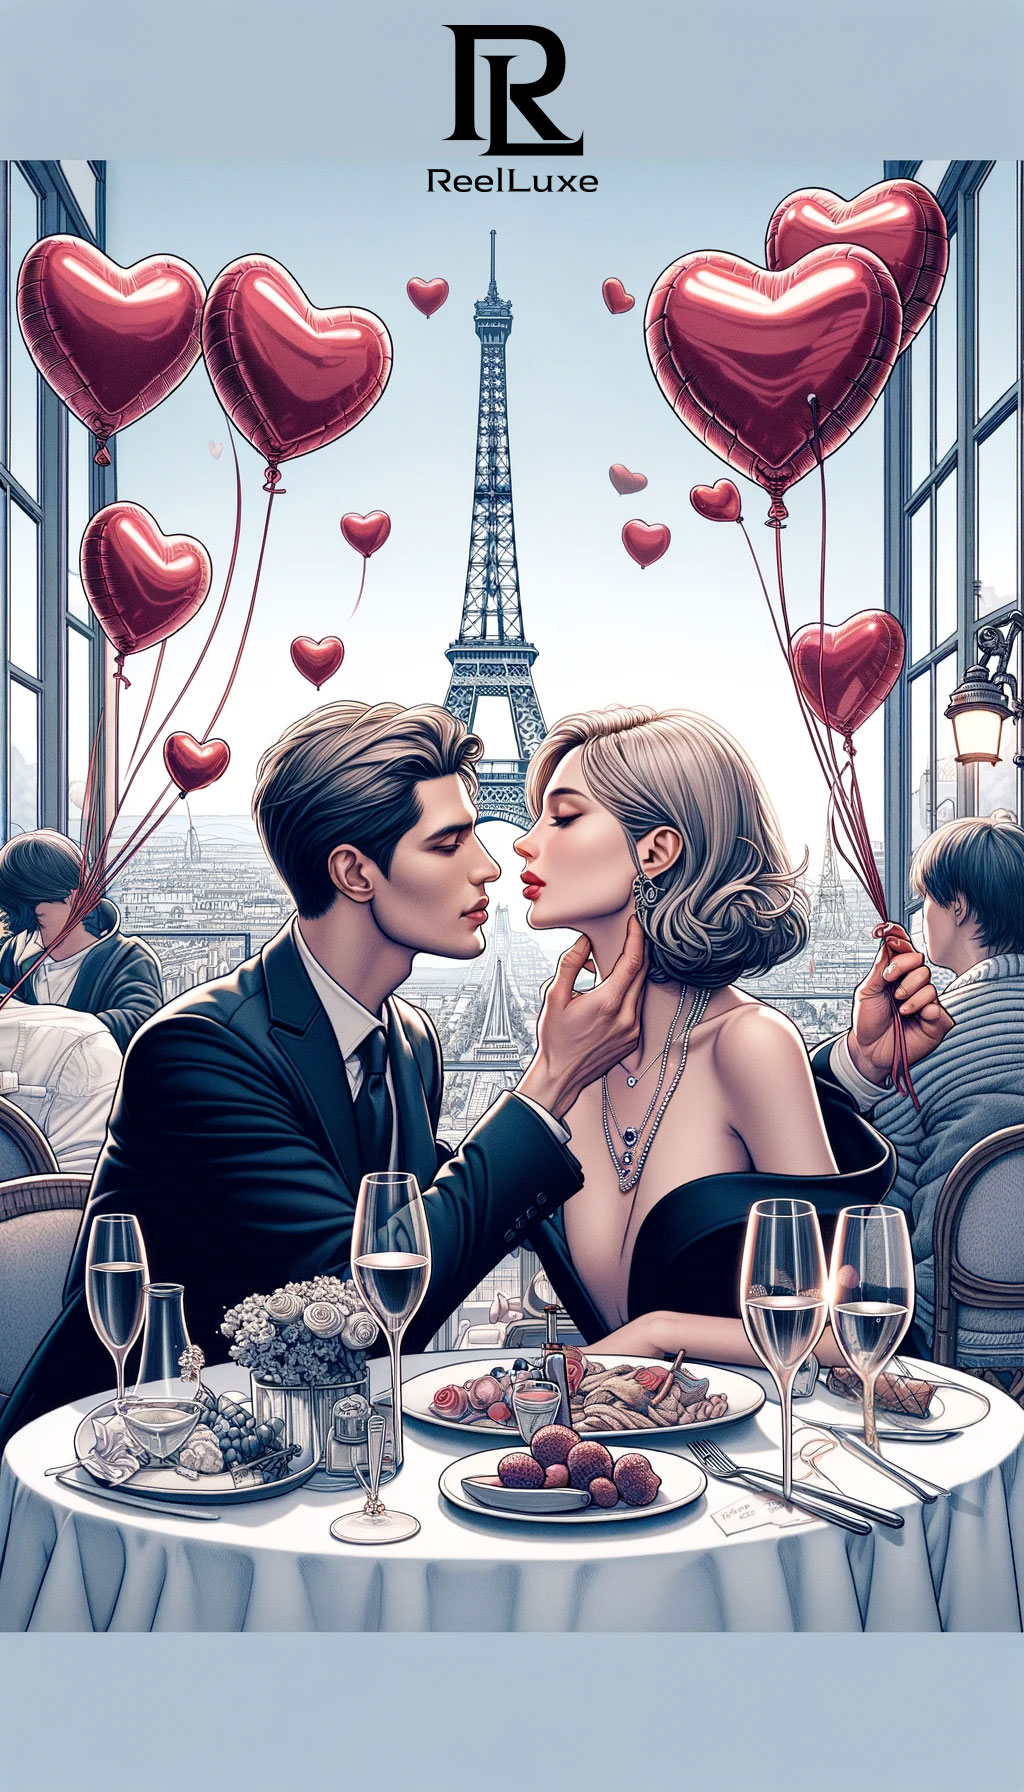 Romance in the Air – Valentine’s Day – Beauty and Fashion – Paris, France – 6